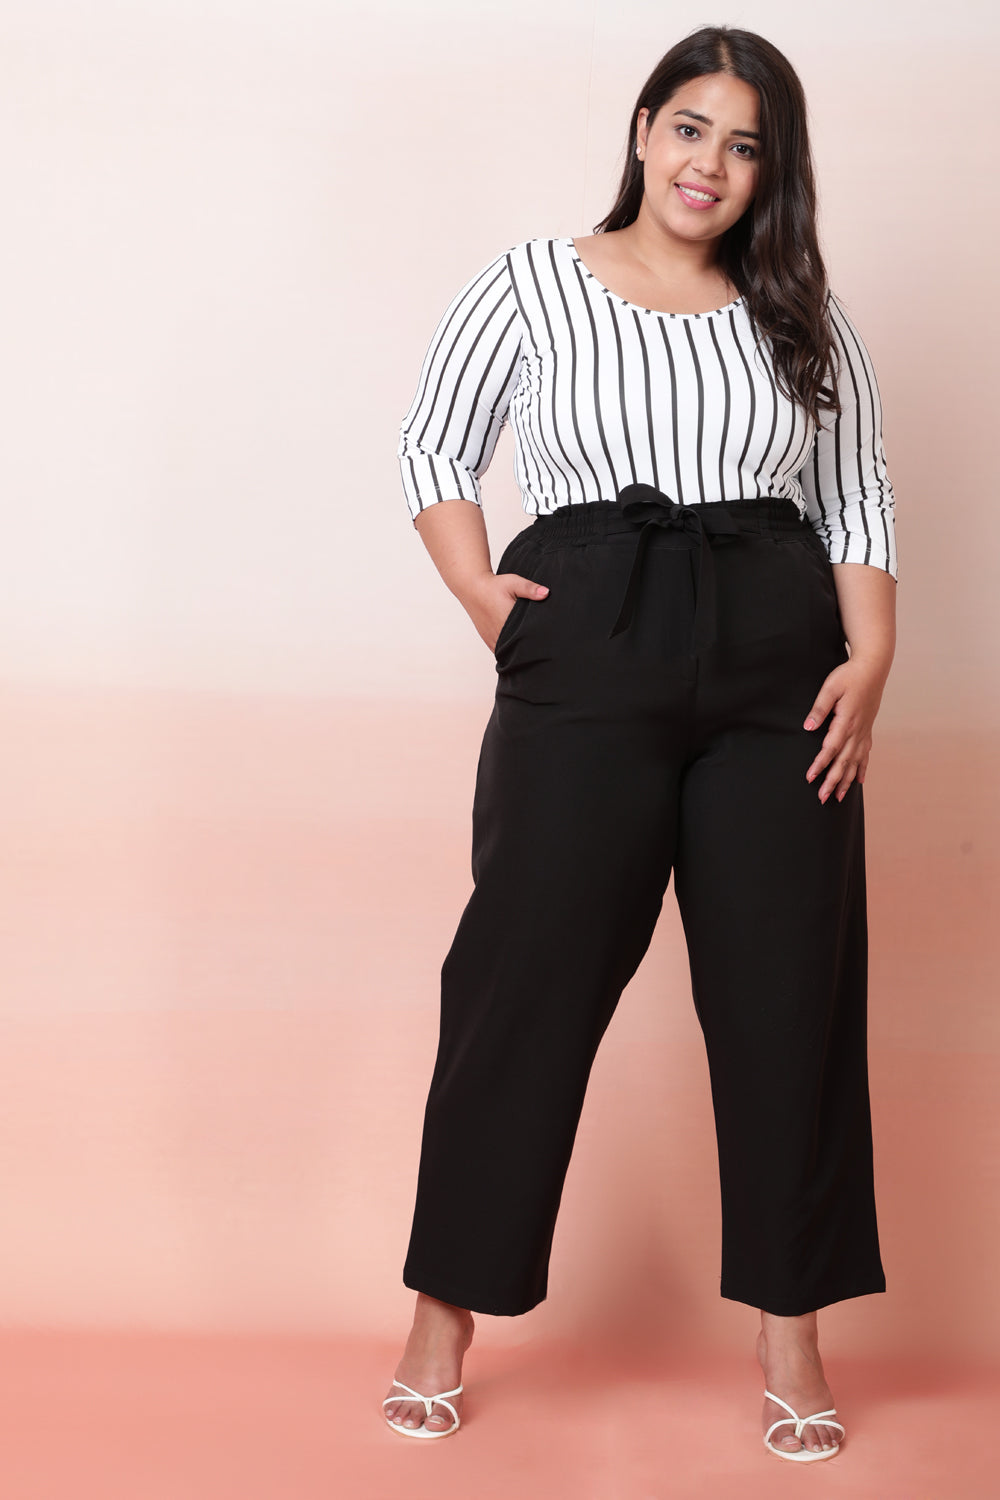 Buy Plus Size Bottom Wear For Women  Shop Online At The Pink Moon